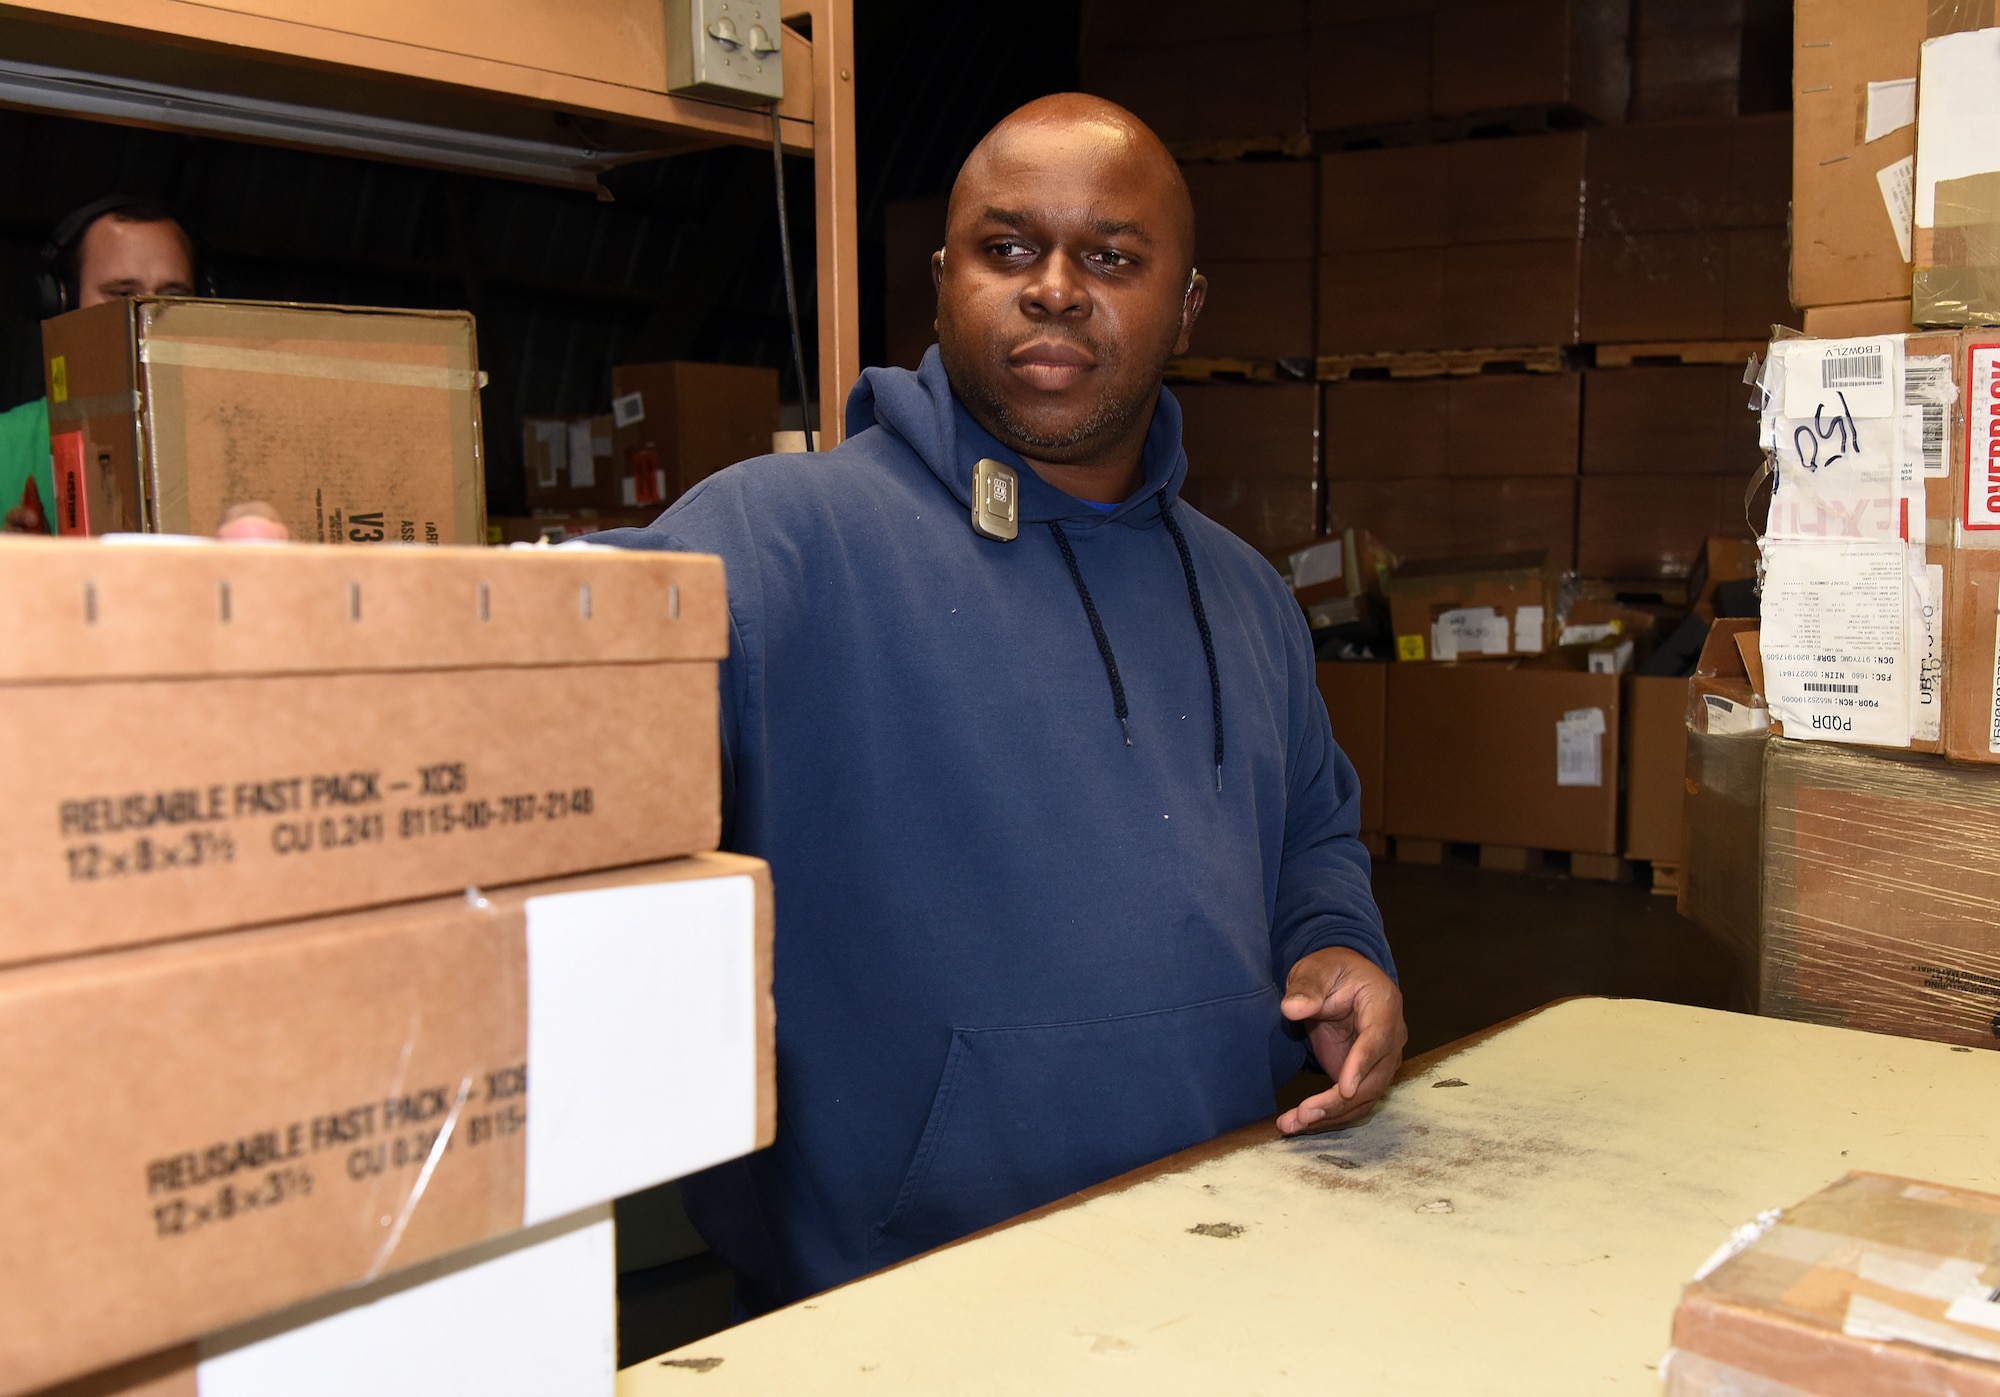 DLA box cleaning worker keeps solid work ethic, positive attitude despite visual, hearing impairments